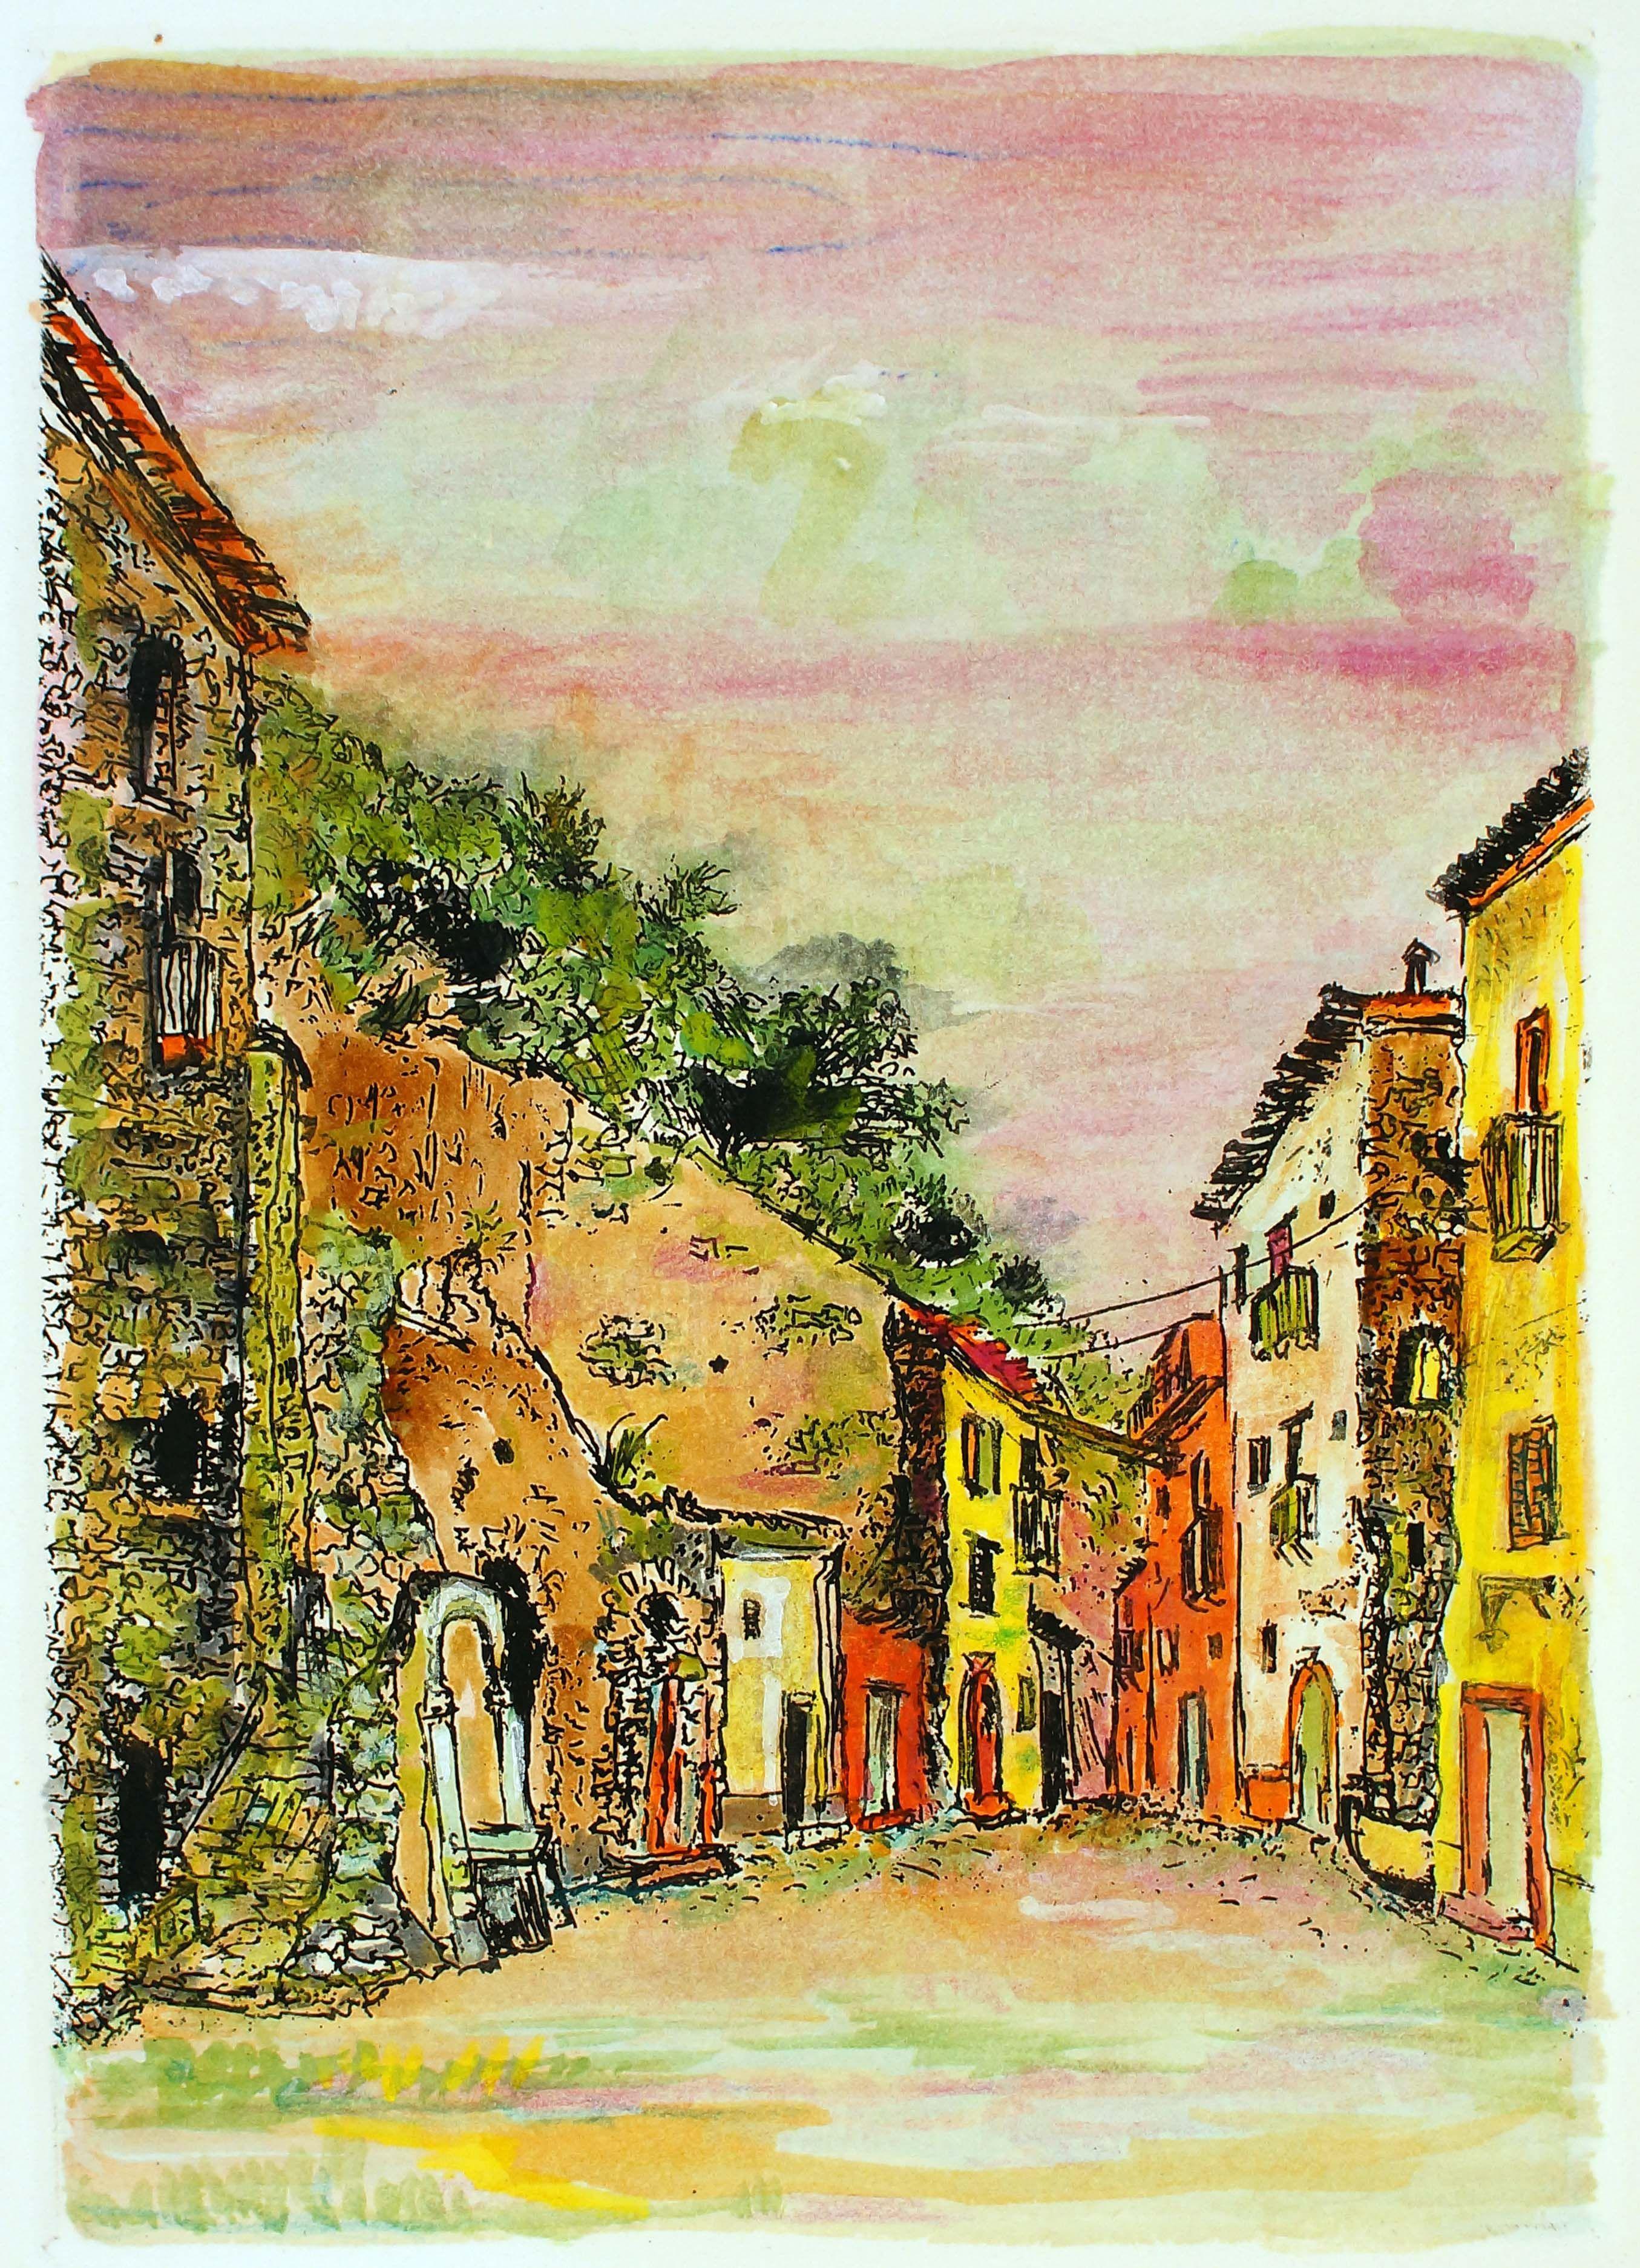 Sunset in the Alleys - Original Etching and Watercolor by G. Omiccioli